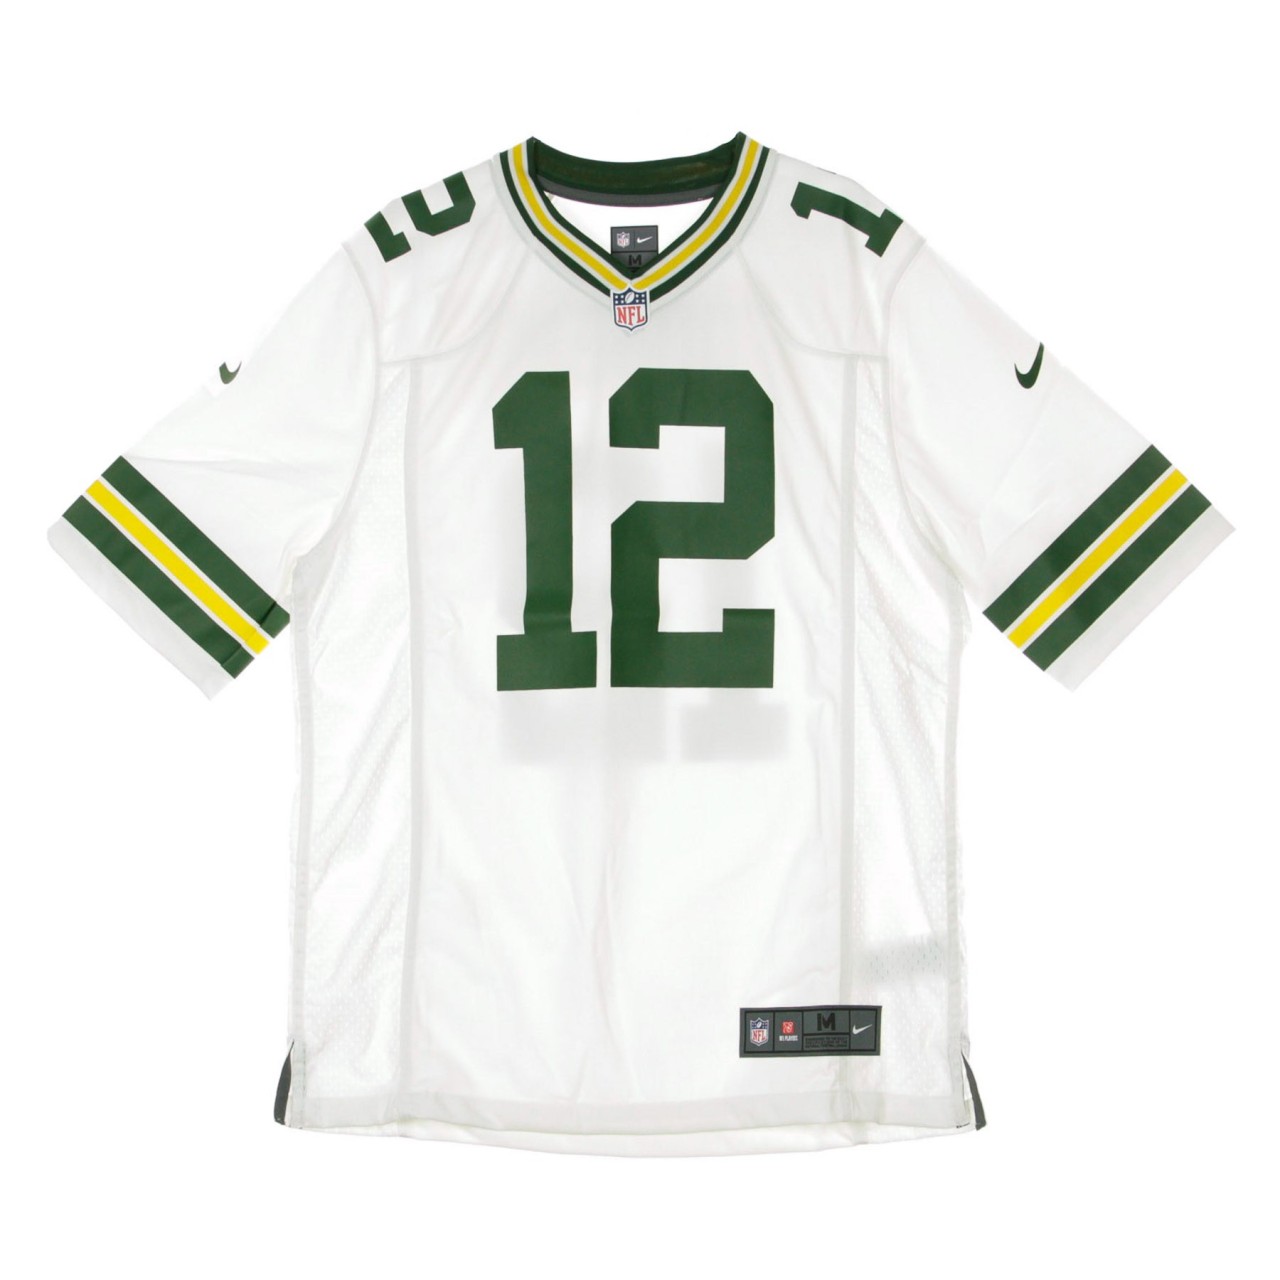 NIKE NFL NFL GAME ROAD JERSEY NO.12 RODGERS GREPAC 67NM-GPGR-7TF-2PA:258